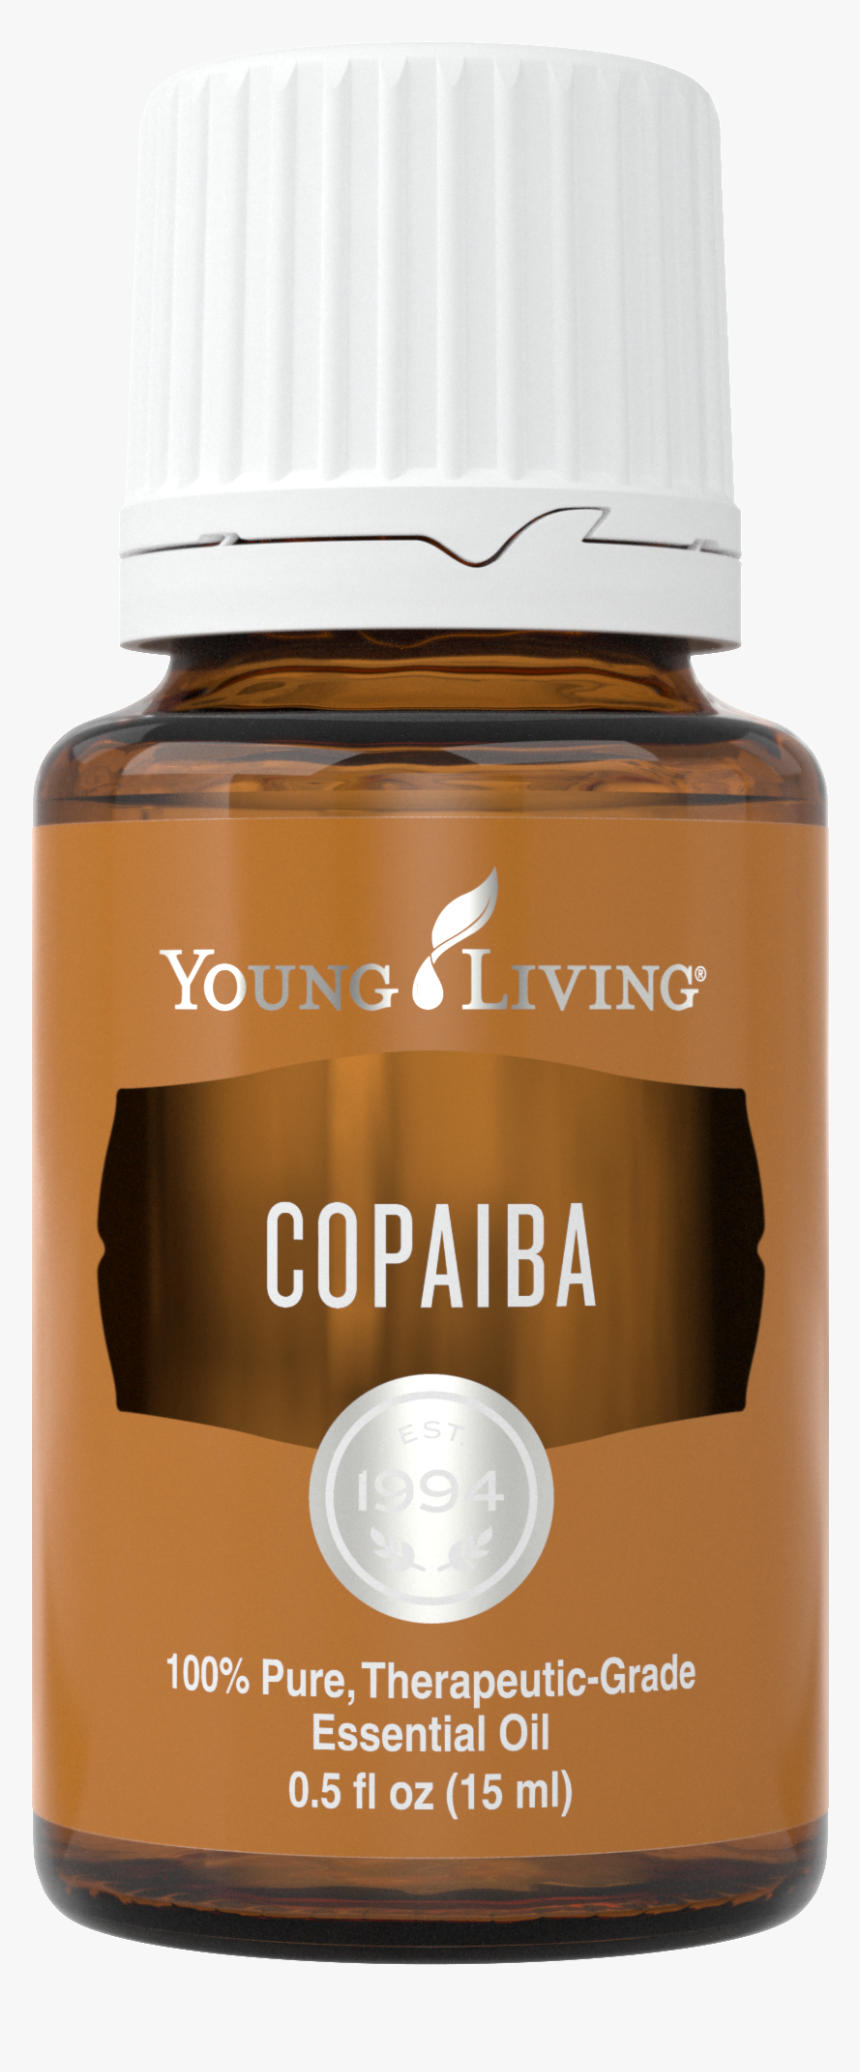 Copaiba Essential Oil Uses - Young Living Copaiba 15ml, HD Png Download, Free Download